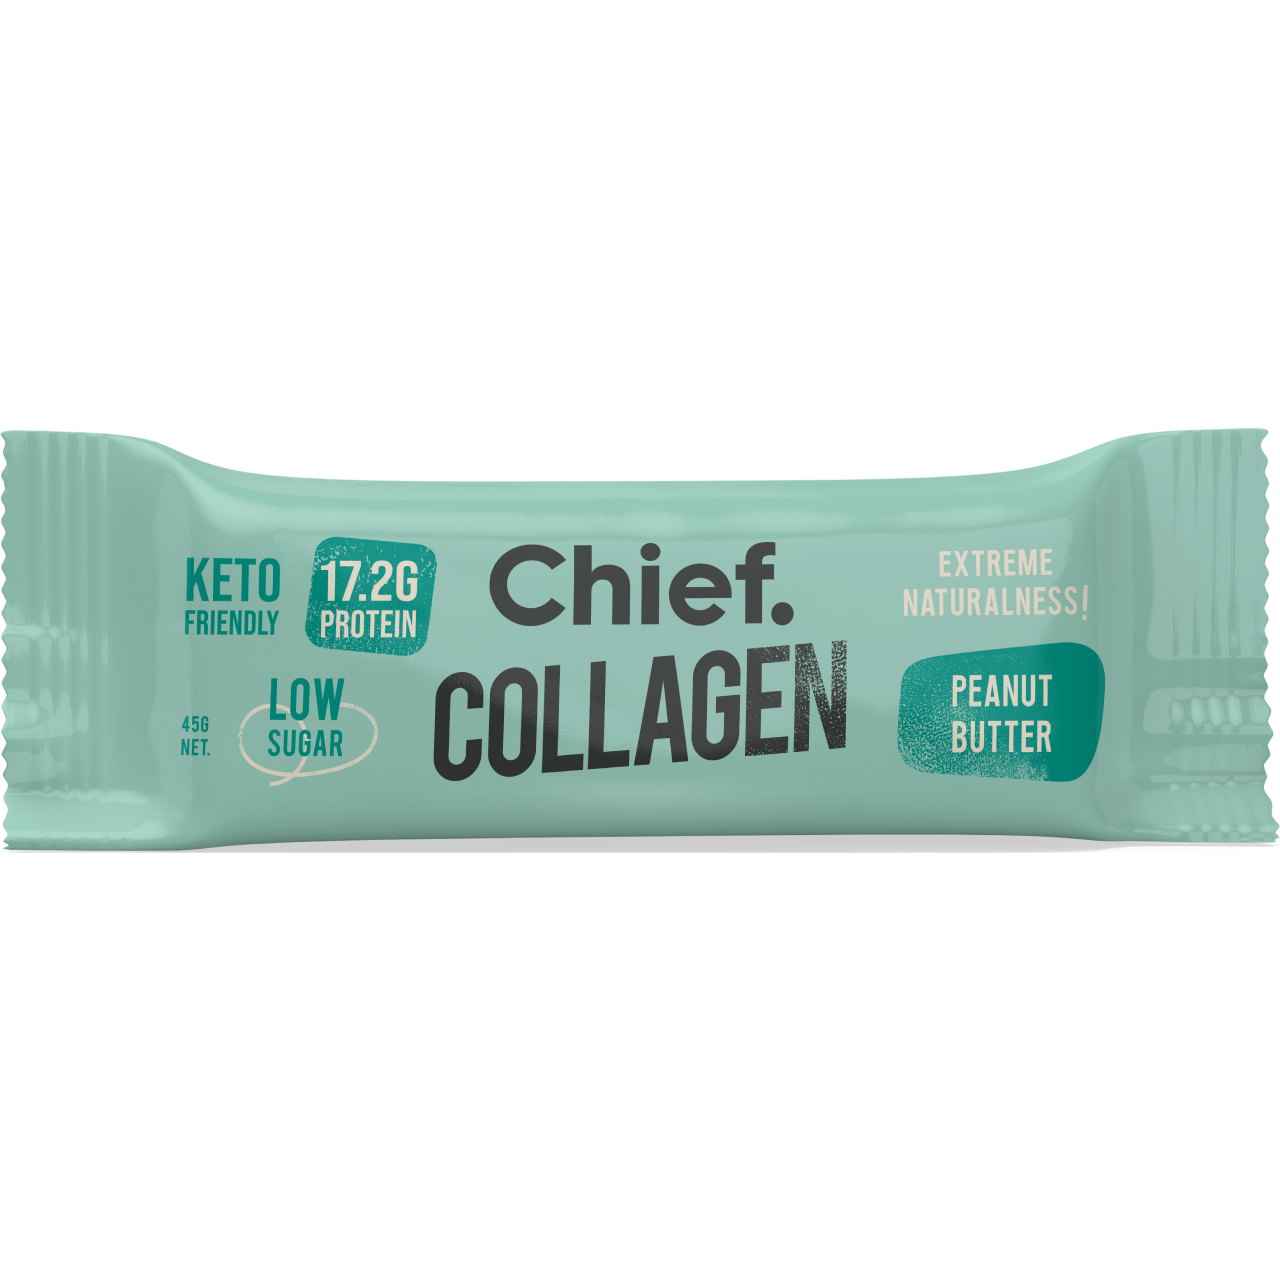 Chief Collagen Protein Bar Sampler (Box of 4 bars)